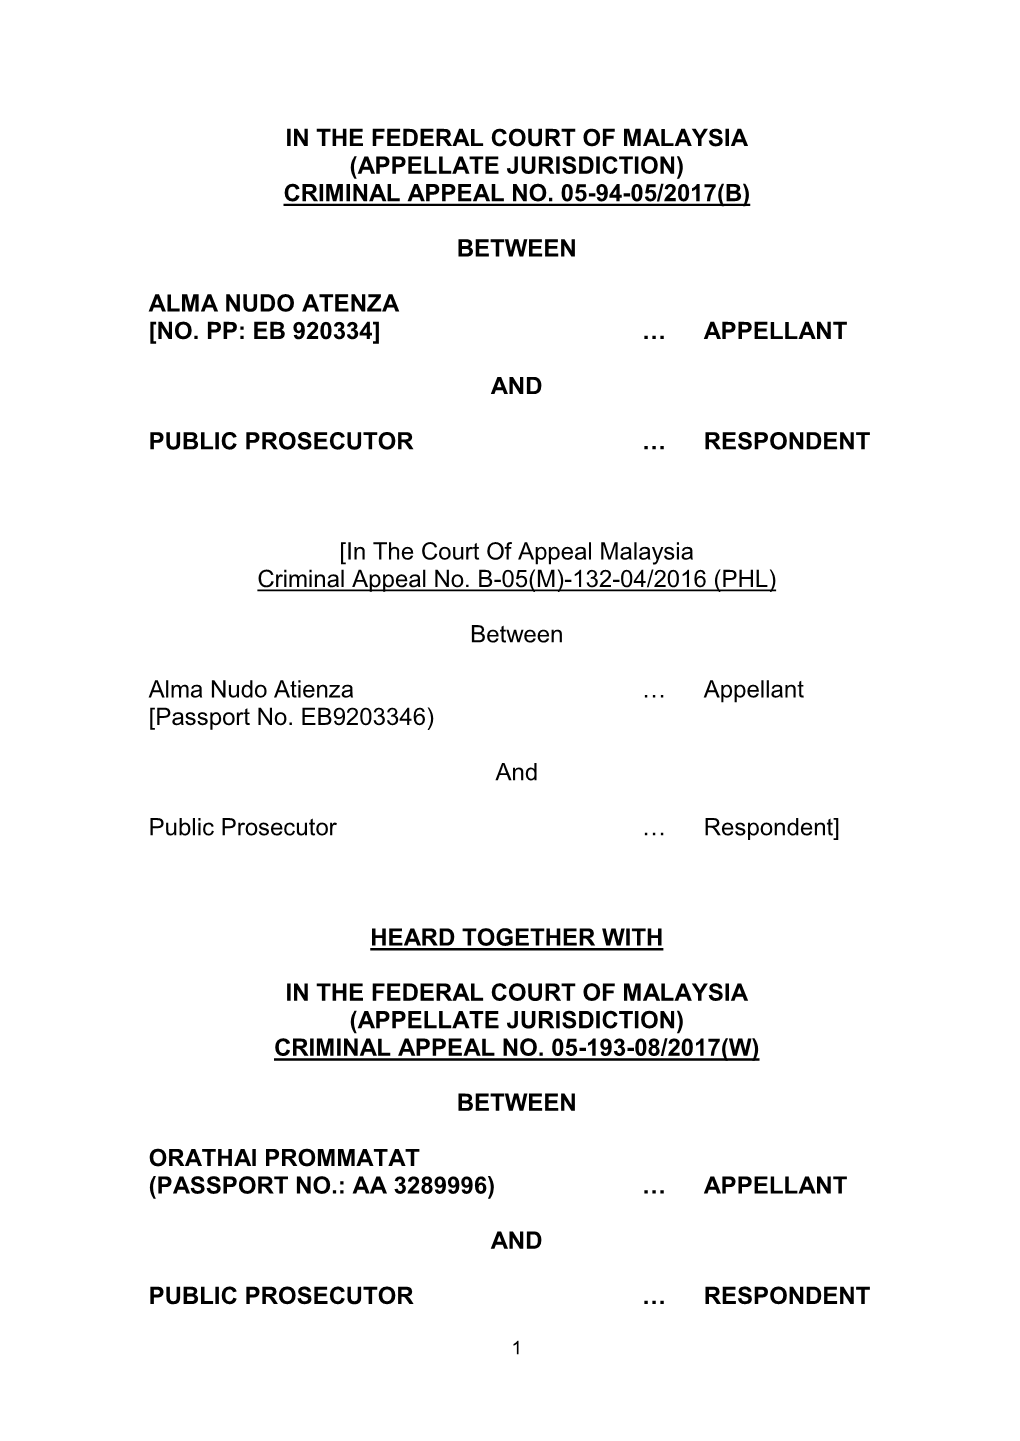 In the Federal Court of Malaysia (Appellate Jurisdiction) Criminal Appeal No. 05-94-05/2017(B) Between Alma Nudo Atenza [No